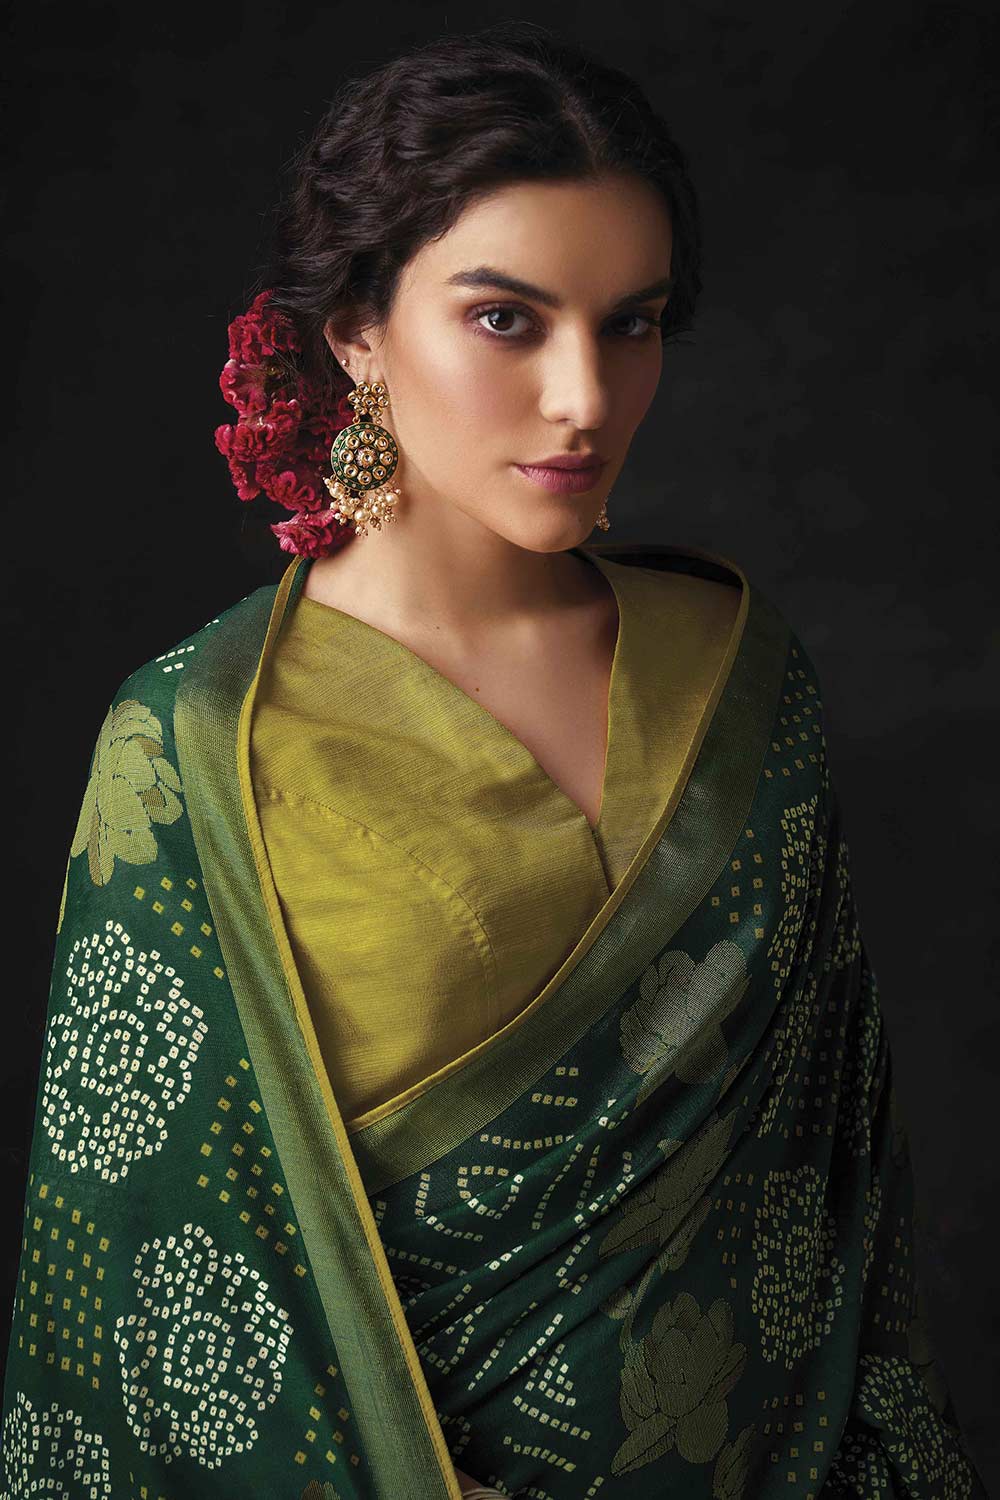 Green Brasso Woven Embroidery Saree